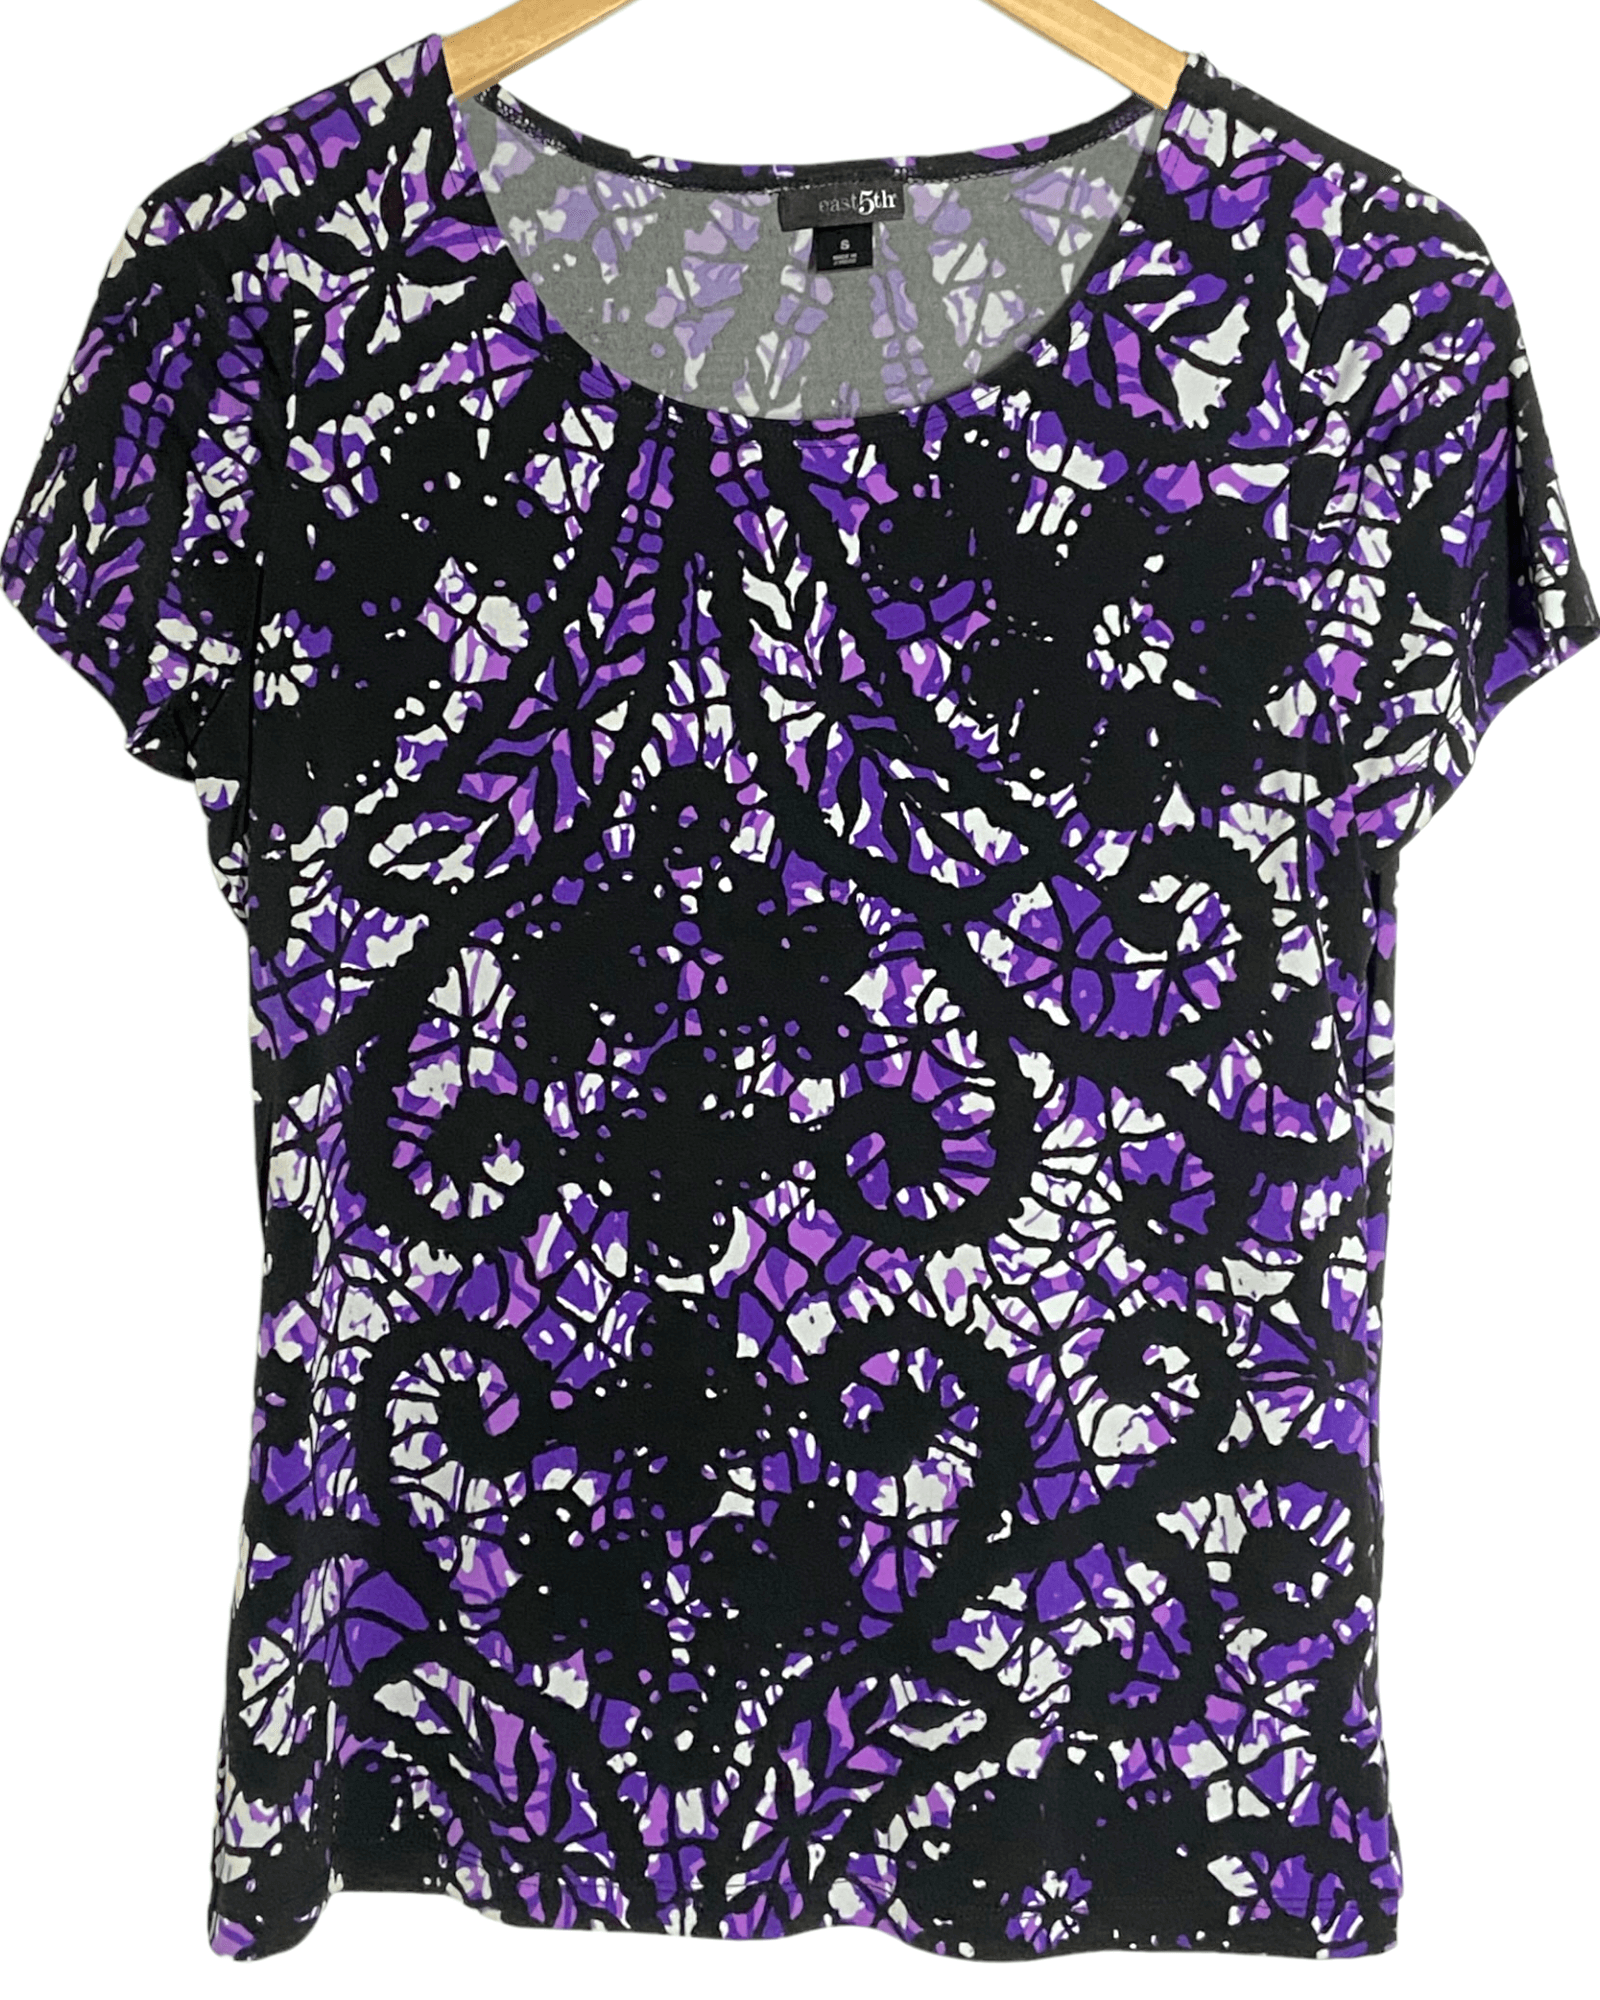 Cool Winter EAST 5TH purple and black lace print shirt top